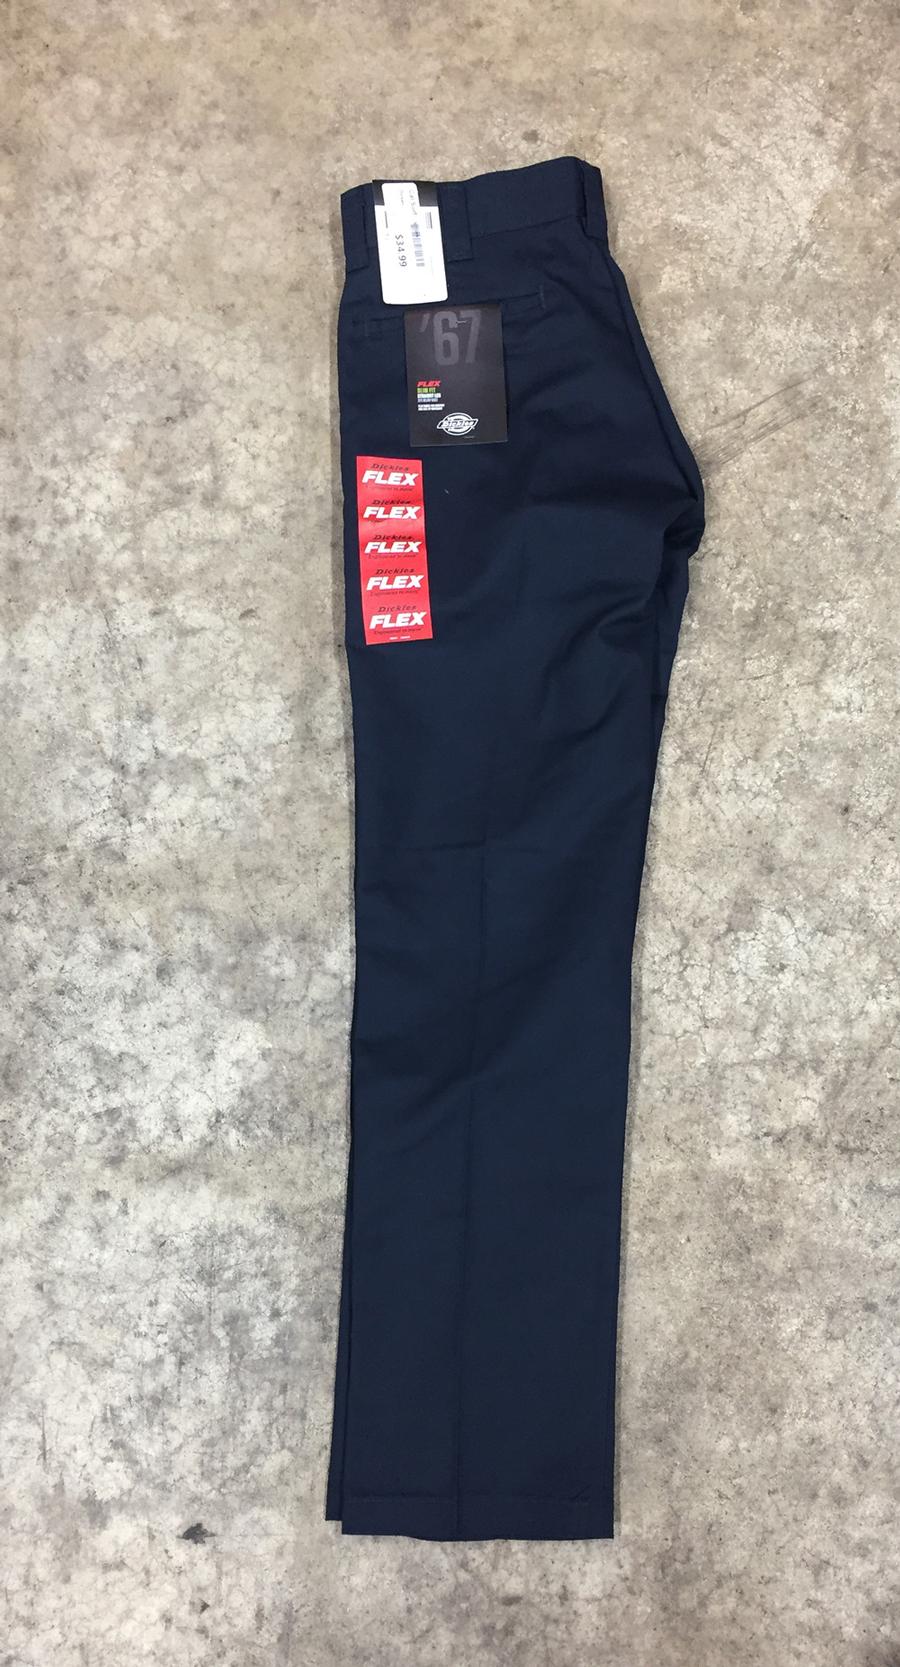 Dickies 67 Collection Slim Straight Work Pant (dn) Pants at Cal Surf